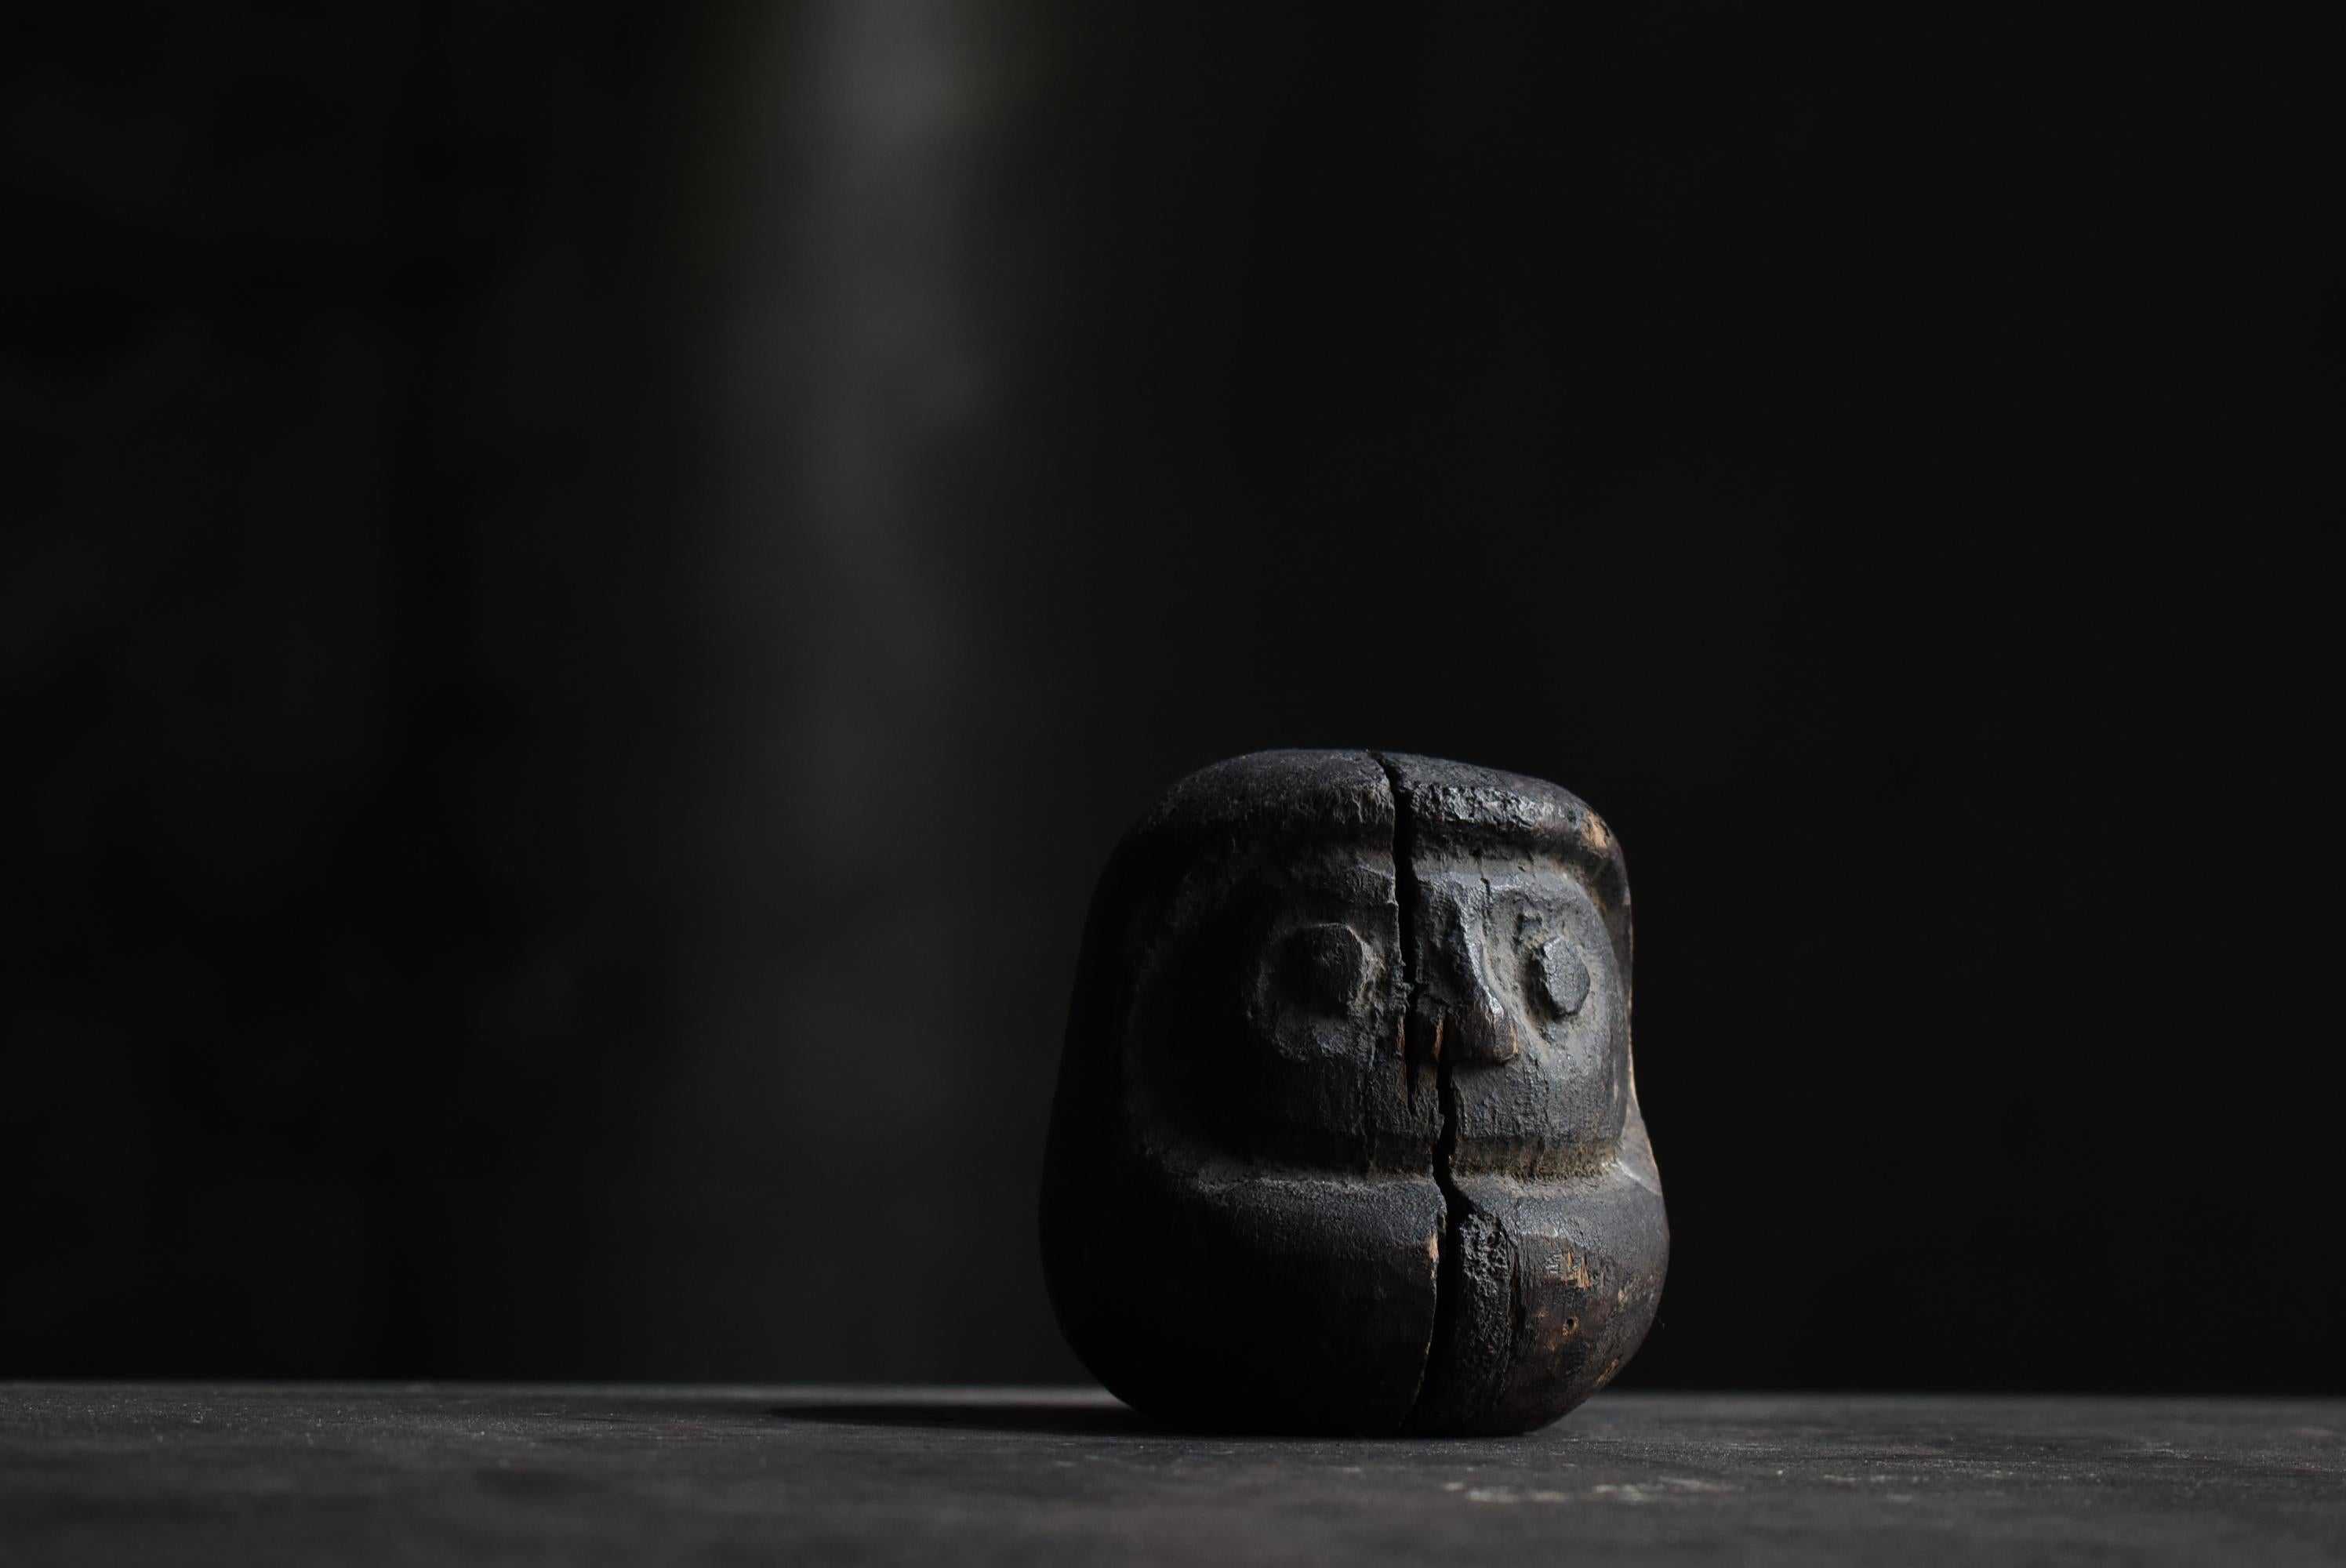 This is a very old wooden Daruma doll.
It was made during the Meiji period (1860s-1900s).
The material is cedar wood.

A wooden model of Daruma doll.
Many Daruma dolls were mass-produced using this wooden pattern.
Even though it has completed its